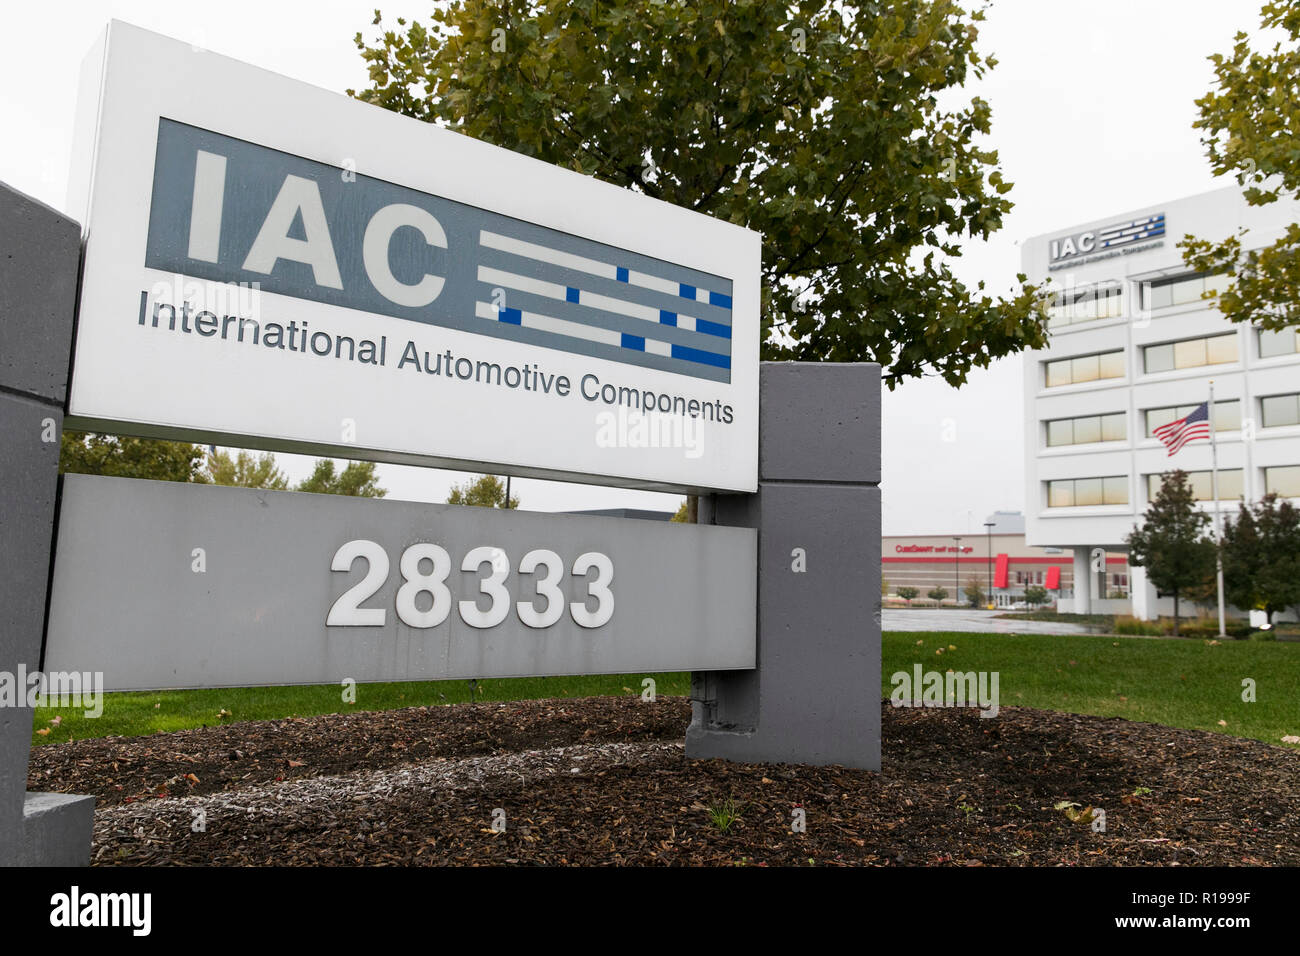 A logo sign outside of a facility occupied by International Automotive Components Group (IAC) in Southfield, Michigan on October 27, 2018. Stock Photo